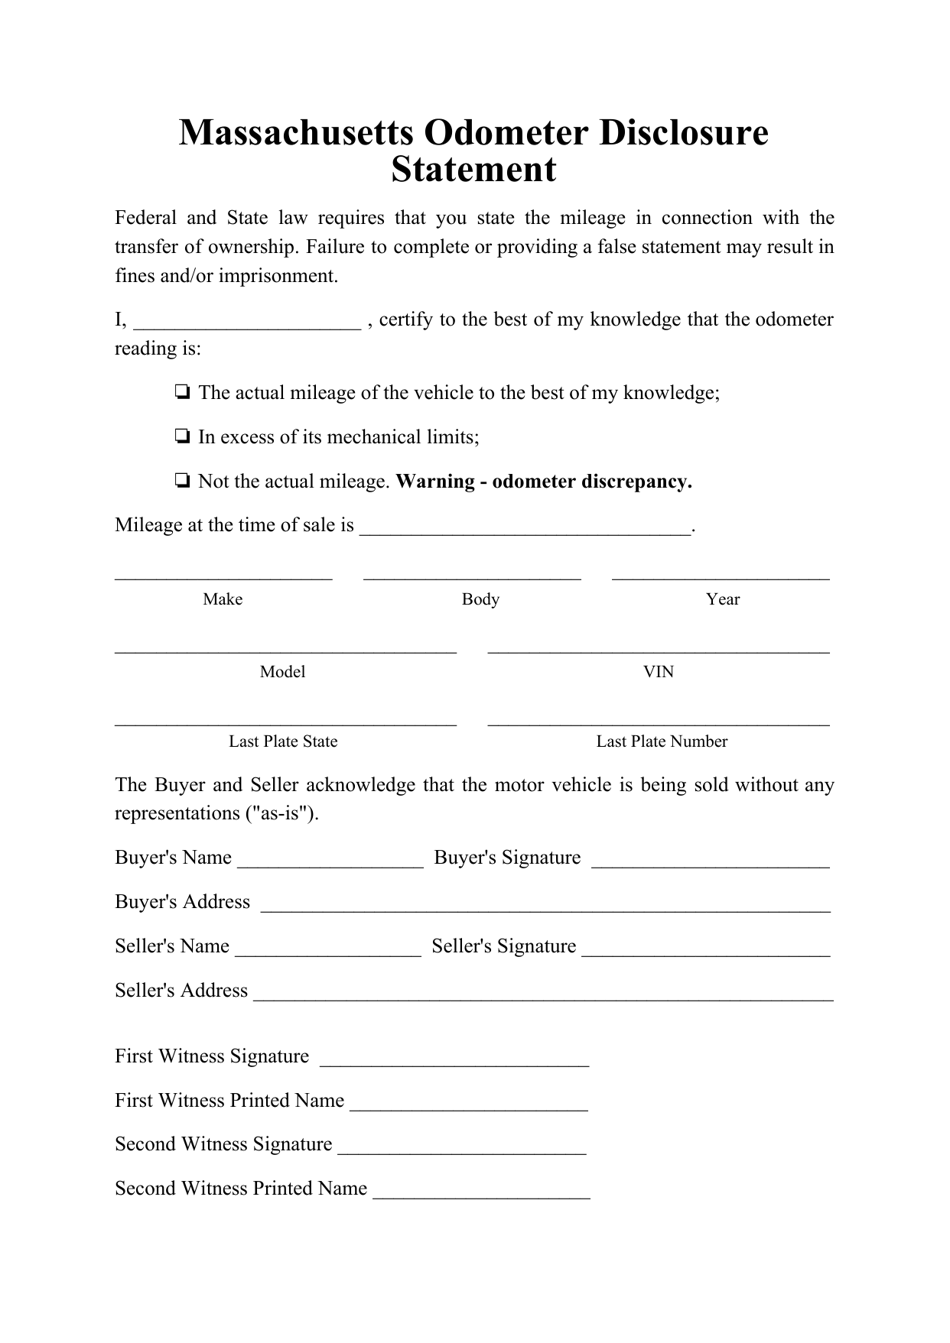 Odometer Disclosure Statement Form - Massachusetts, Page 1